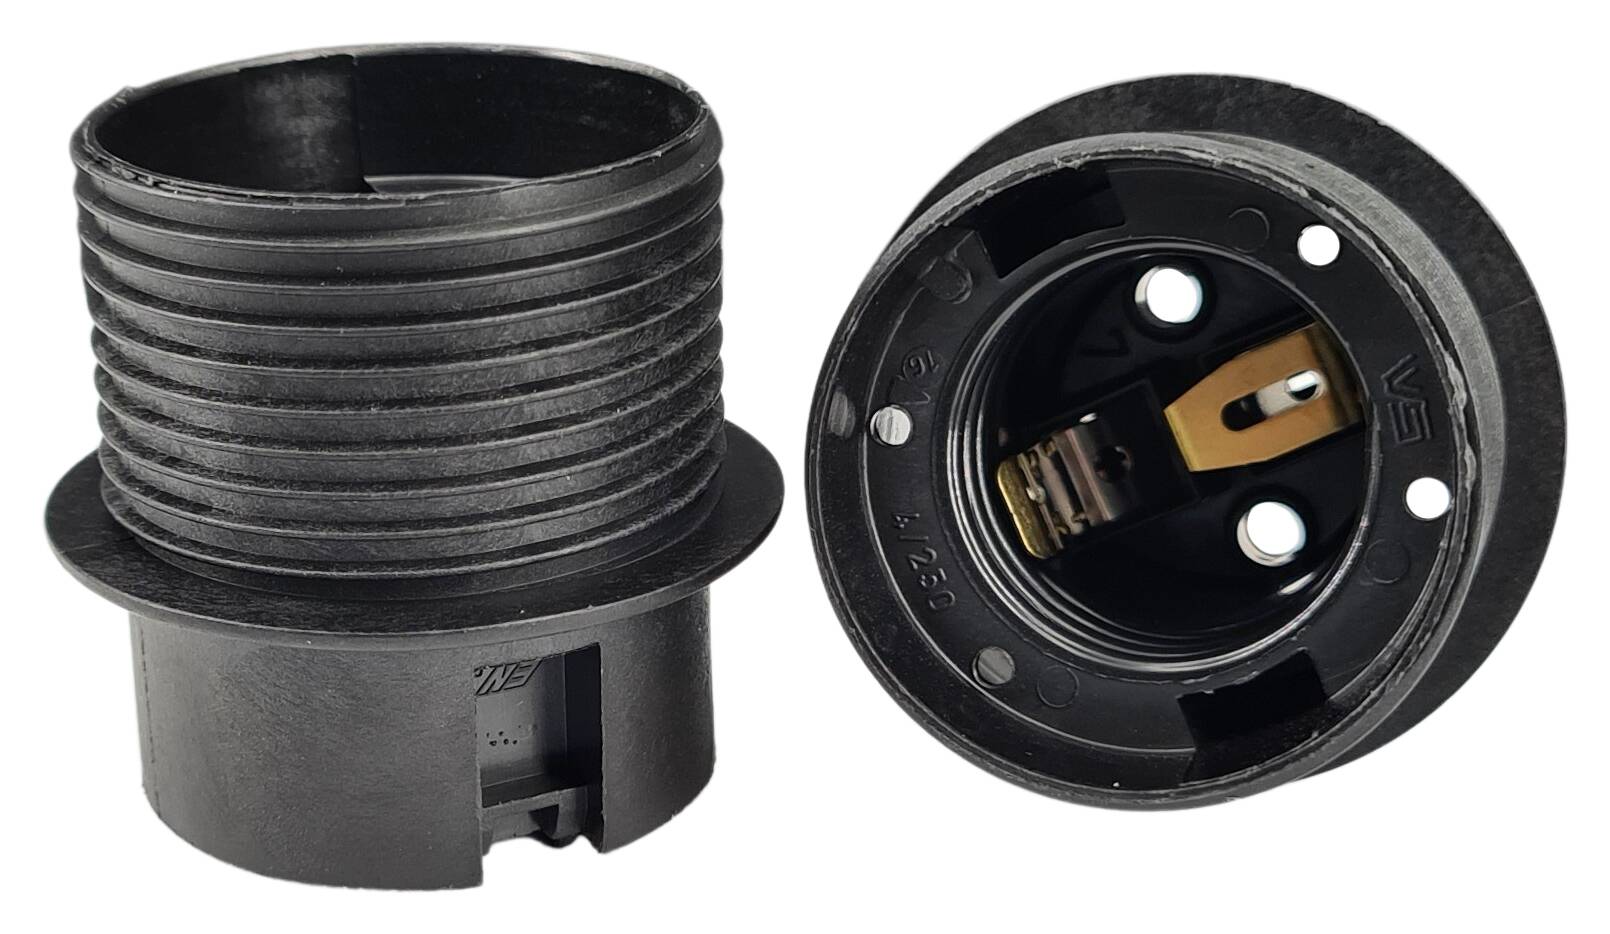 E27 partial-threaded for thermoplastic lampholder black